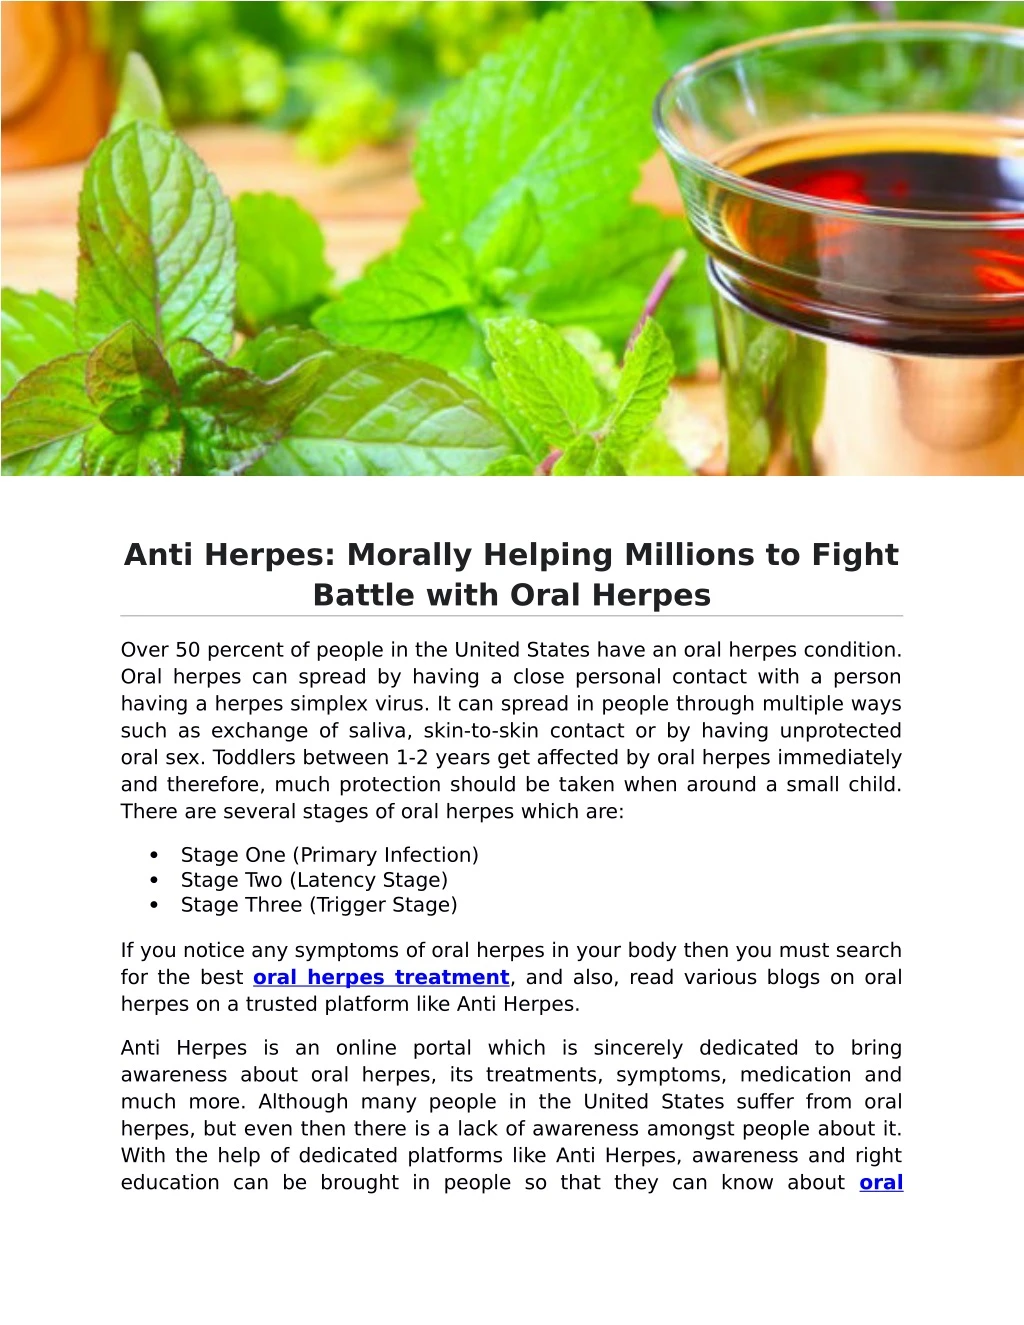 anti herpes morally helping millions to fight